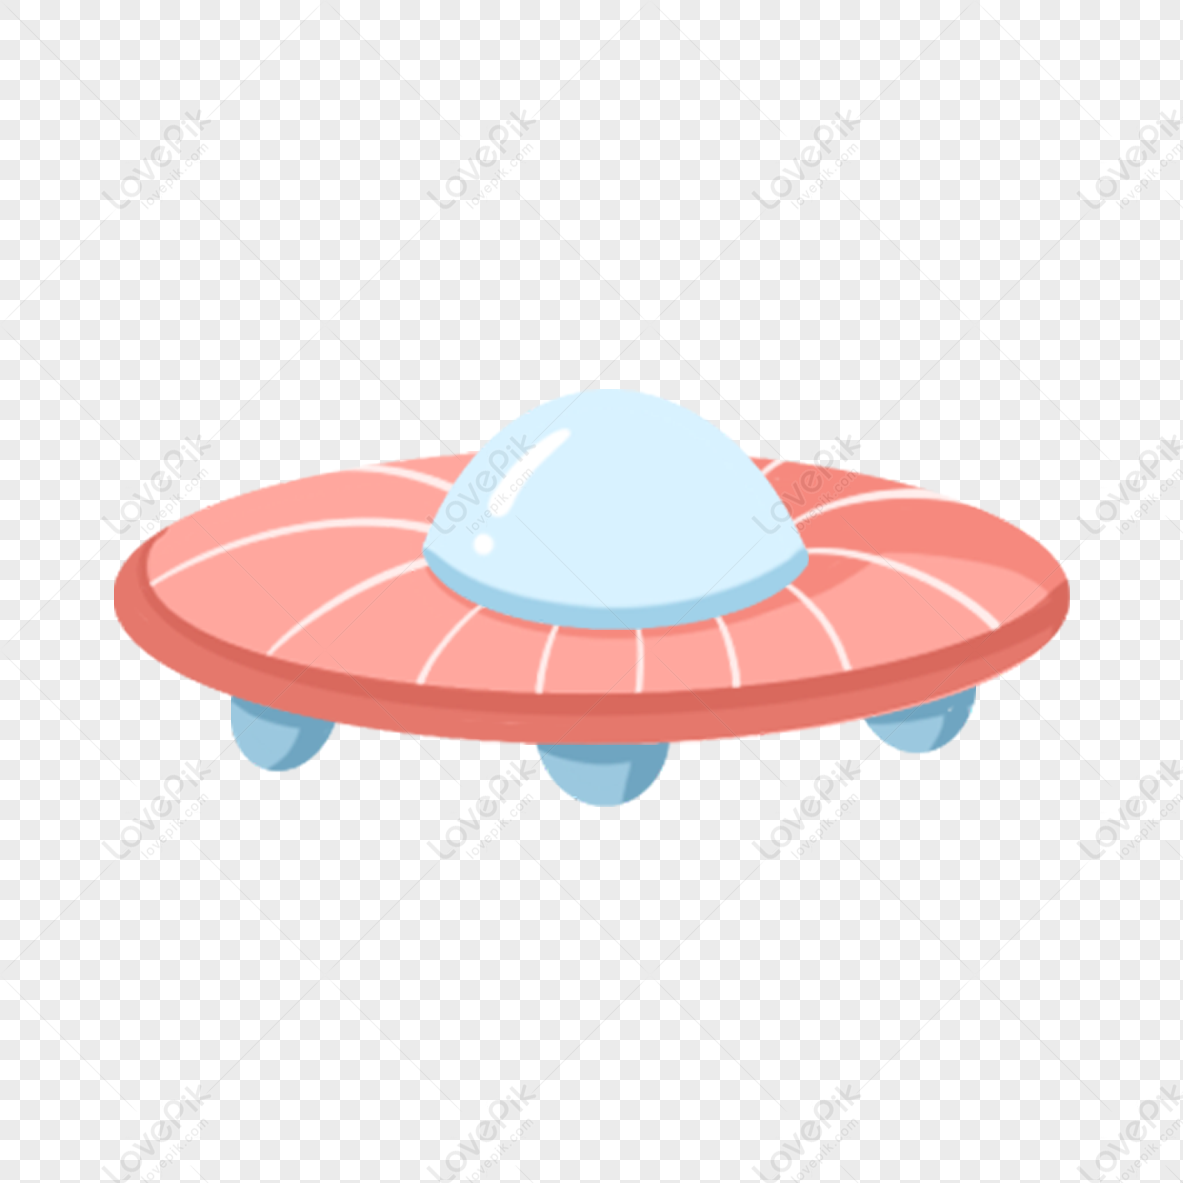 Pink Spaceship Free PNG And Clipart Image For Free Download - Lovepik |  401723909